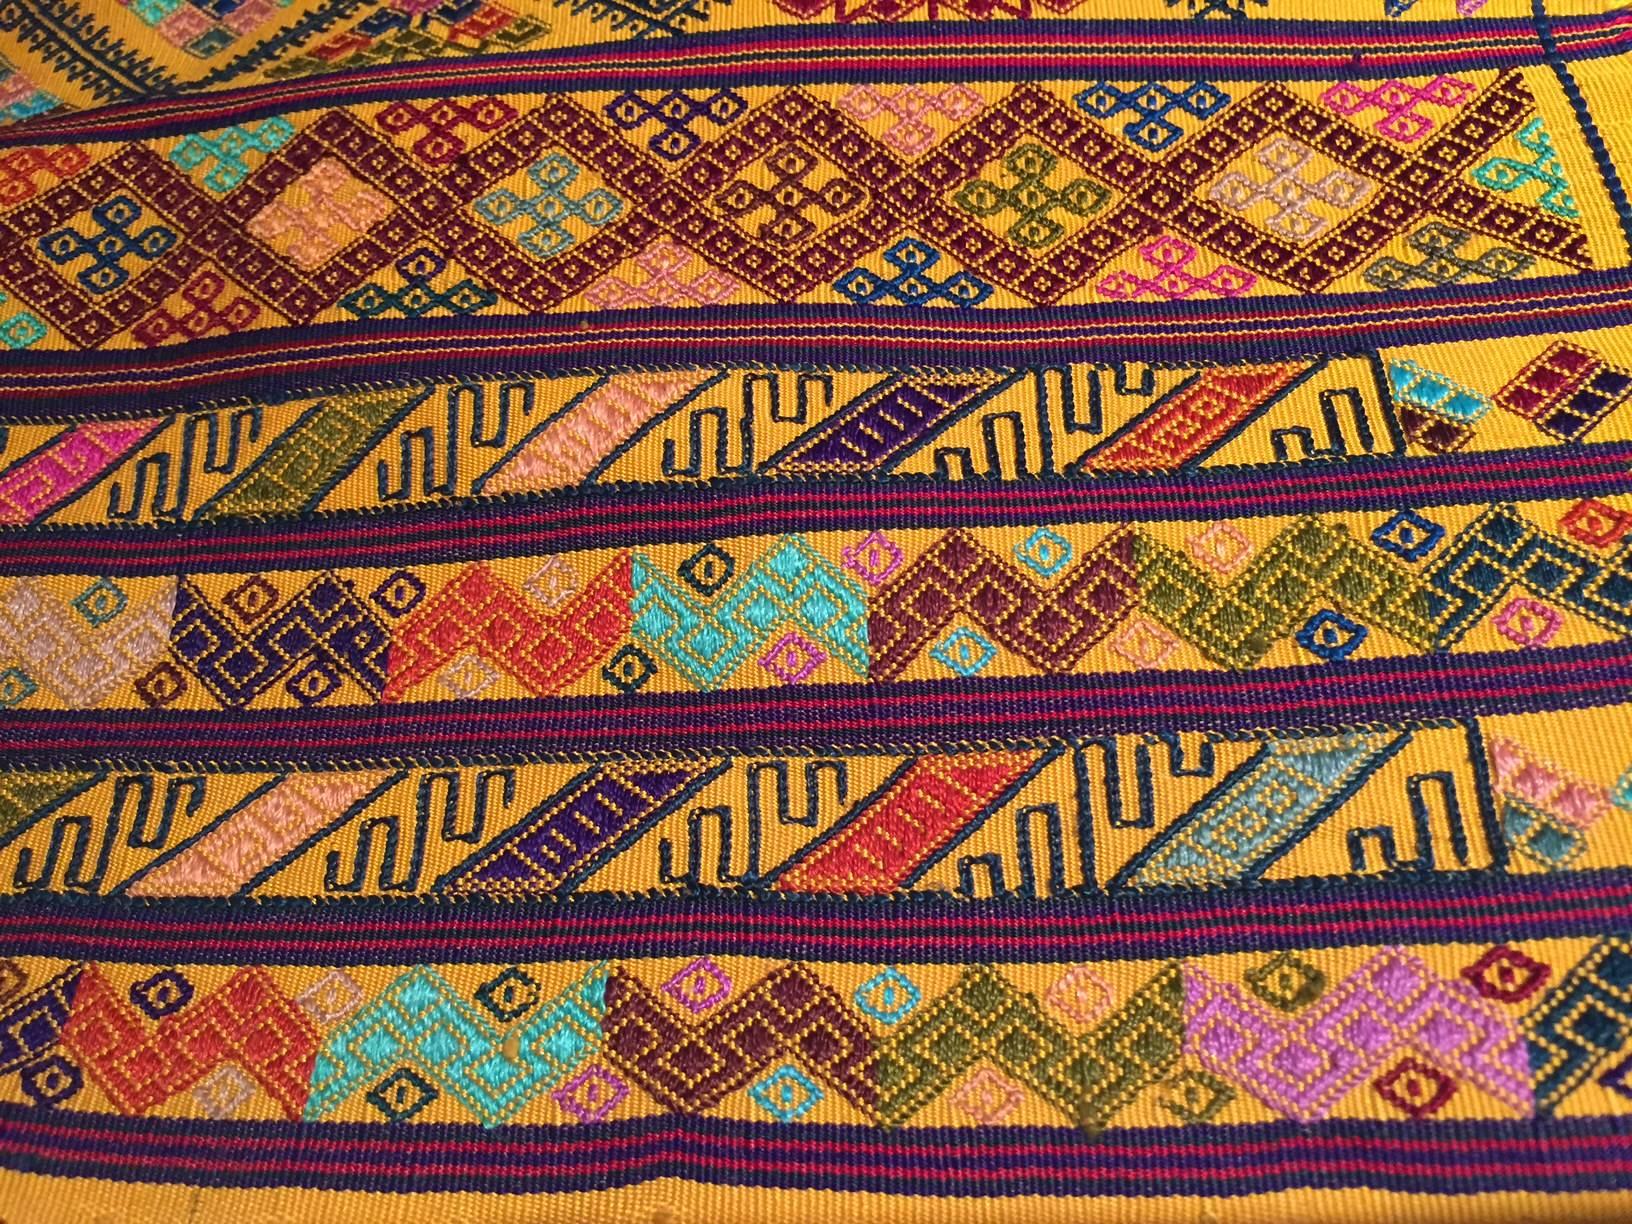 From the royal weavers of Bhutan, this kira textile is a rectangular weaving worn as an ankle length dress by Bhutanese women. This example was originally woven for Her Majesty Gyalyum (Queen Mother) Sangay Choden Wangchuck, who founded the Royal